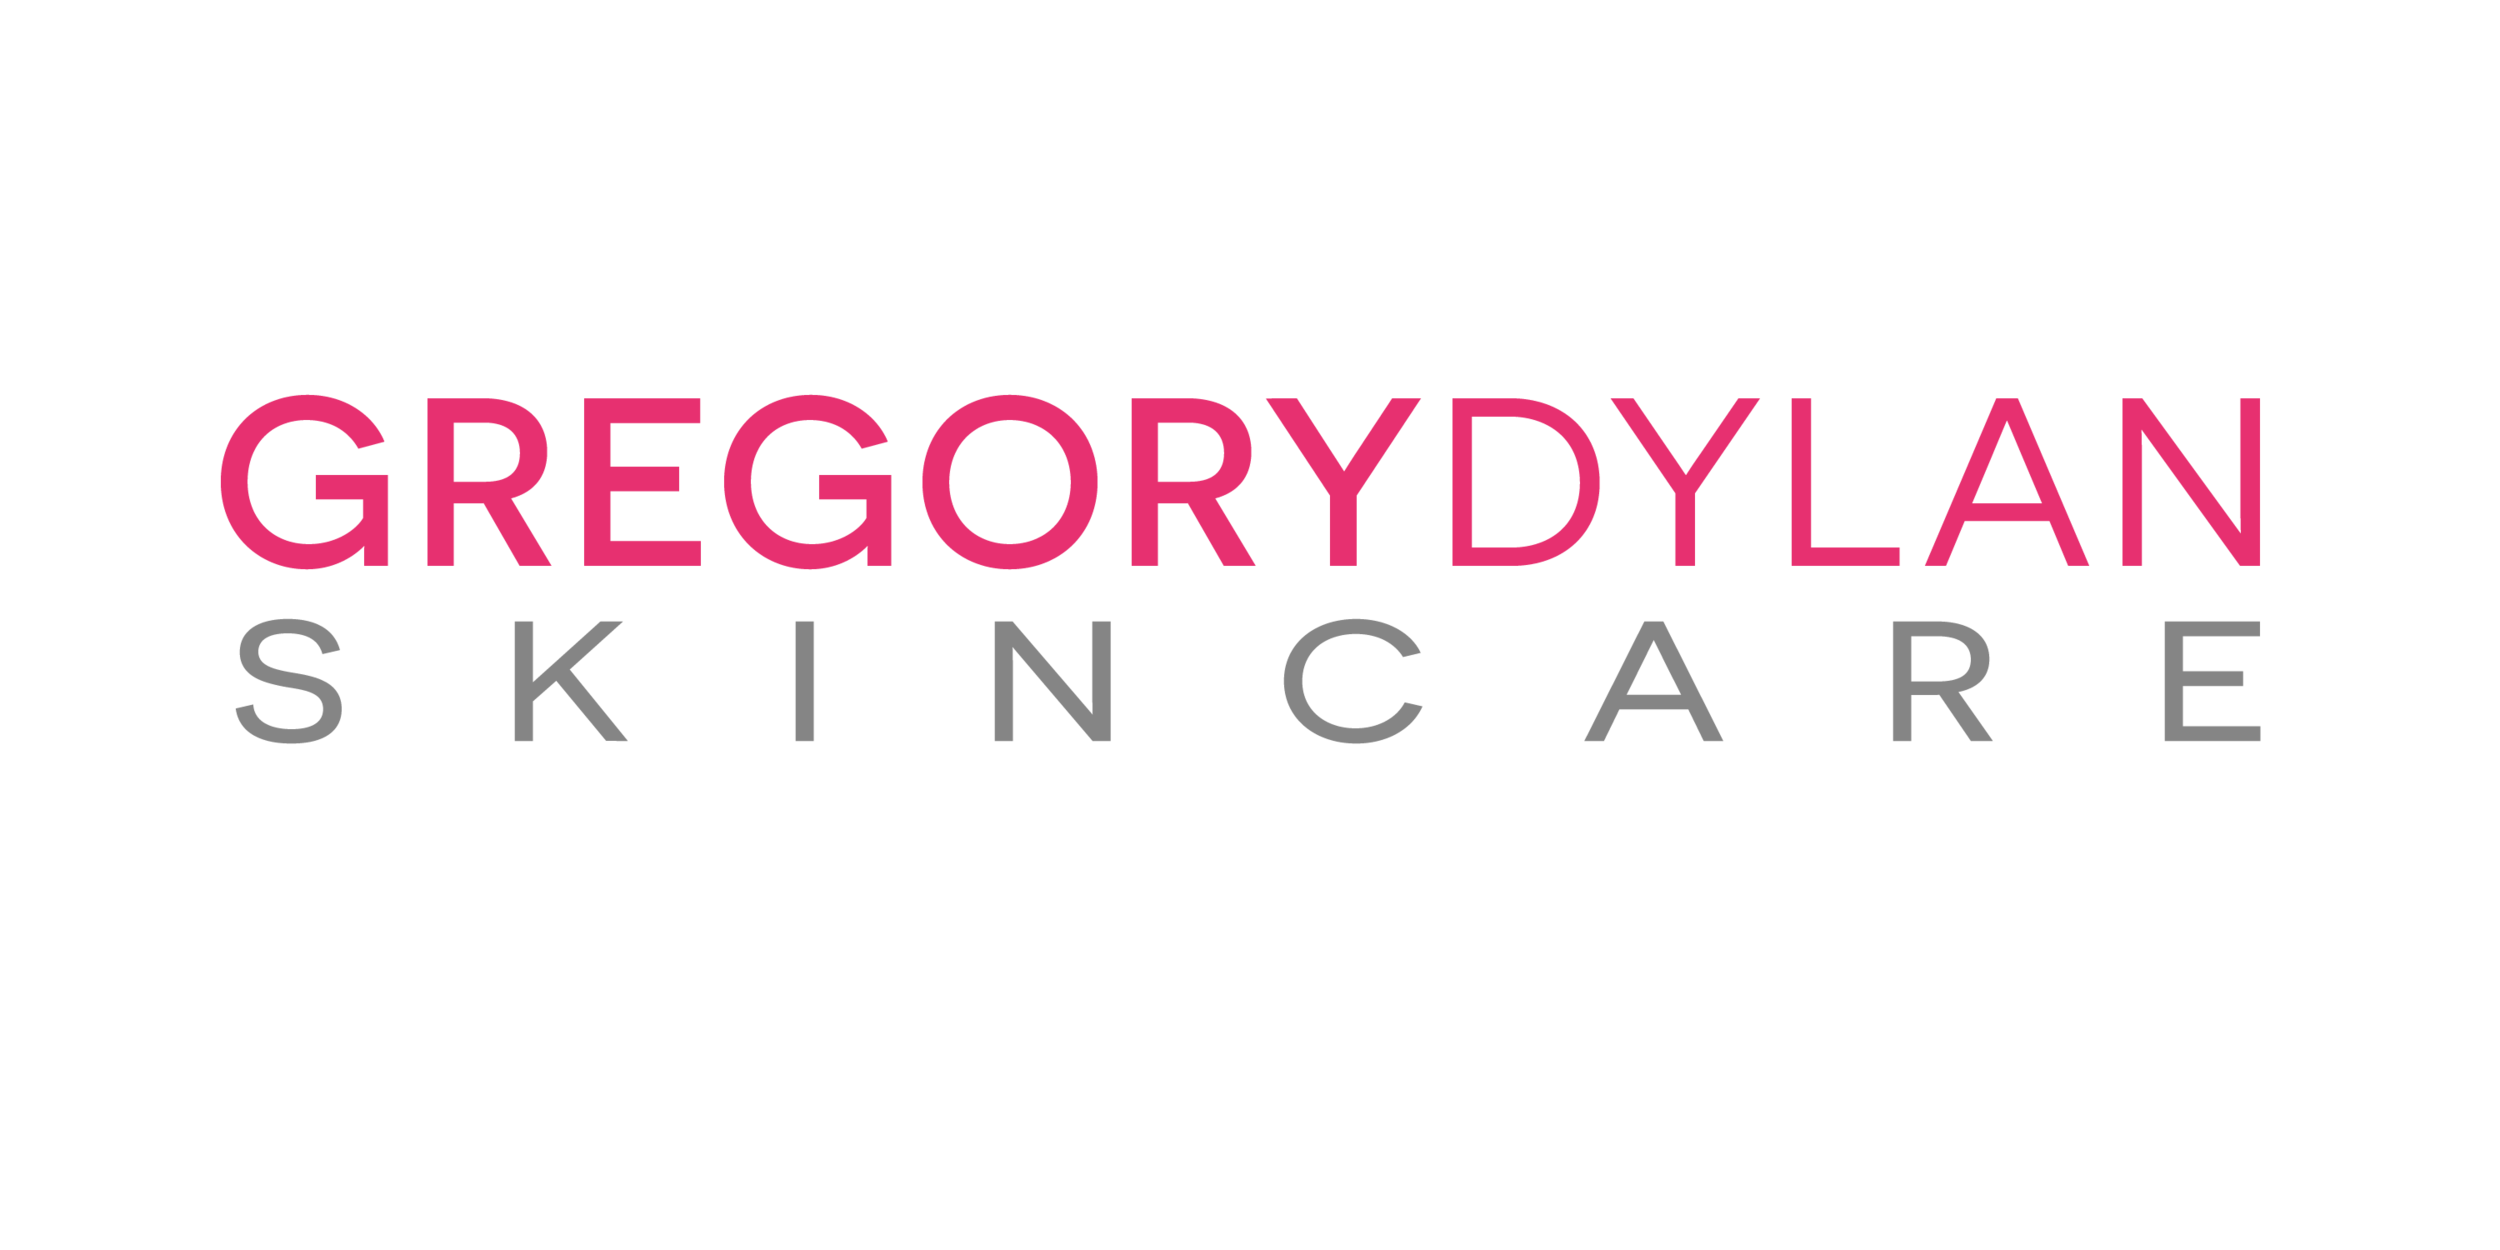 GREGORY DYLAN SKINCARE